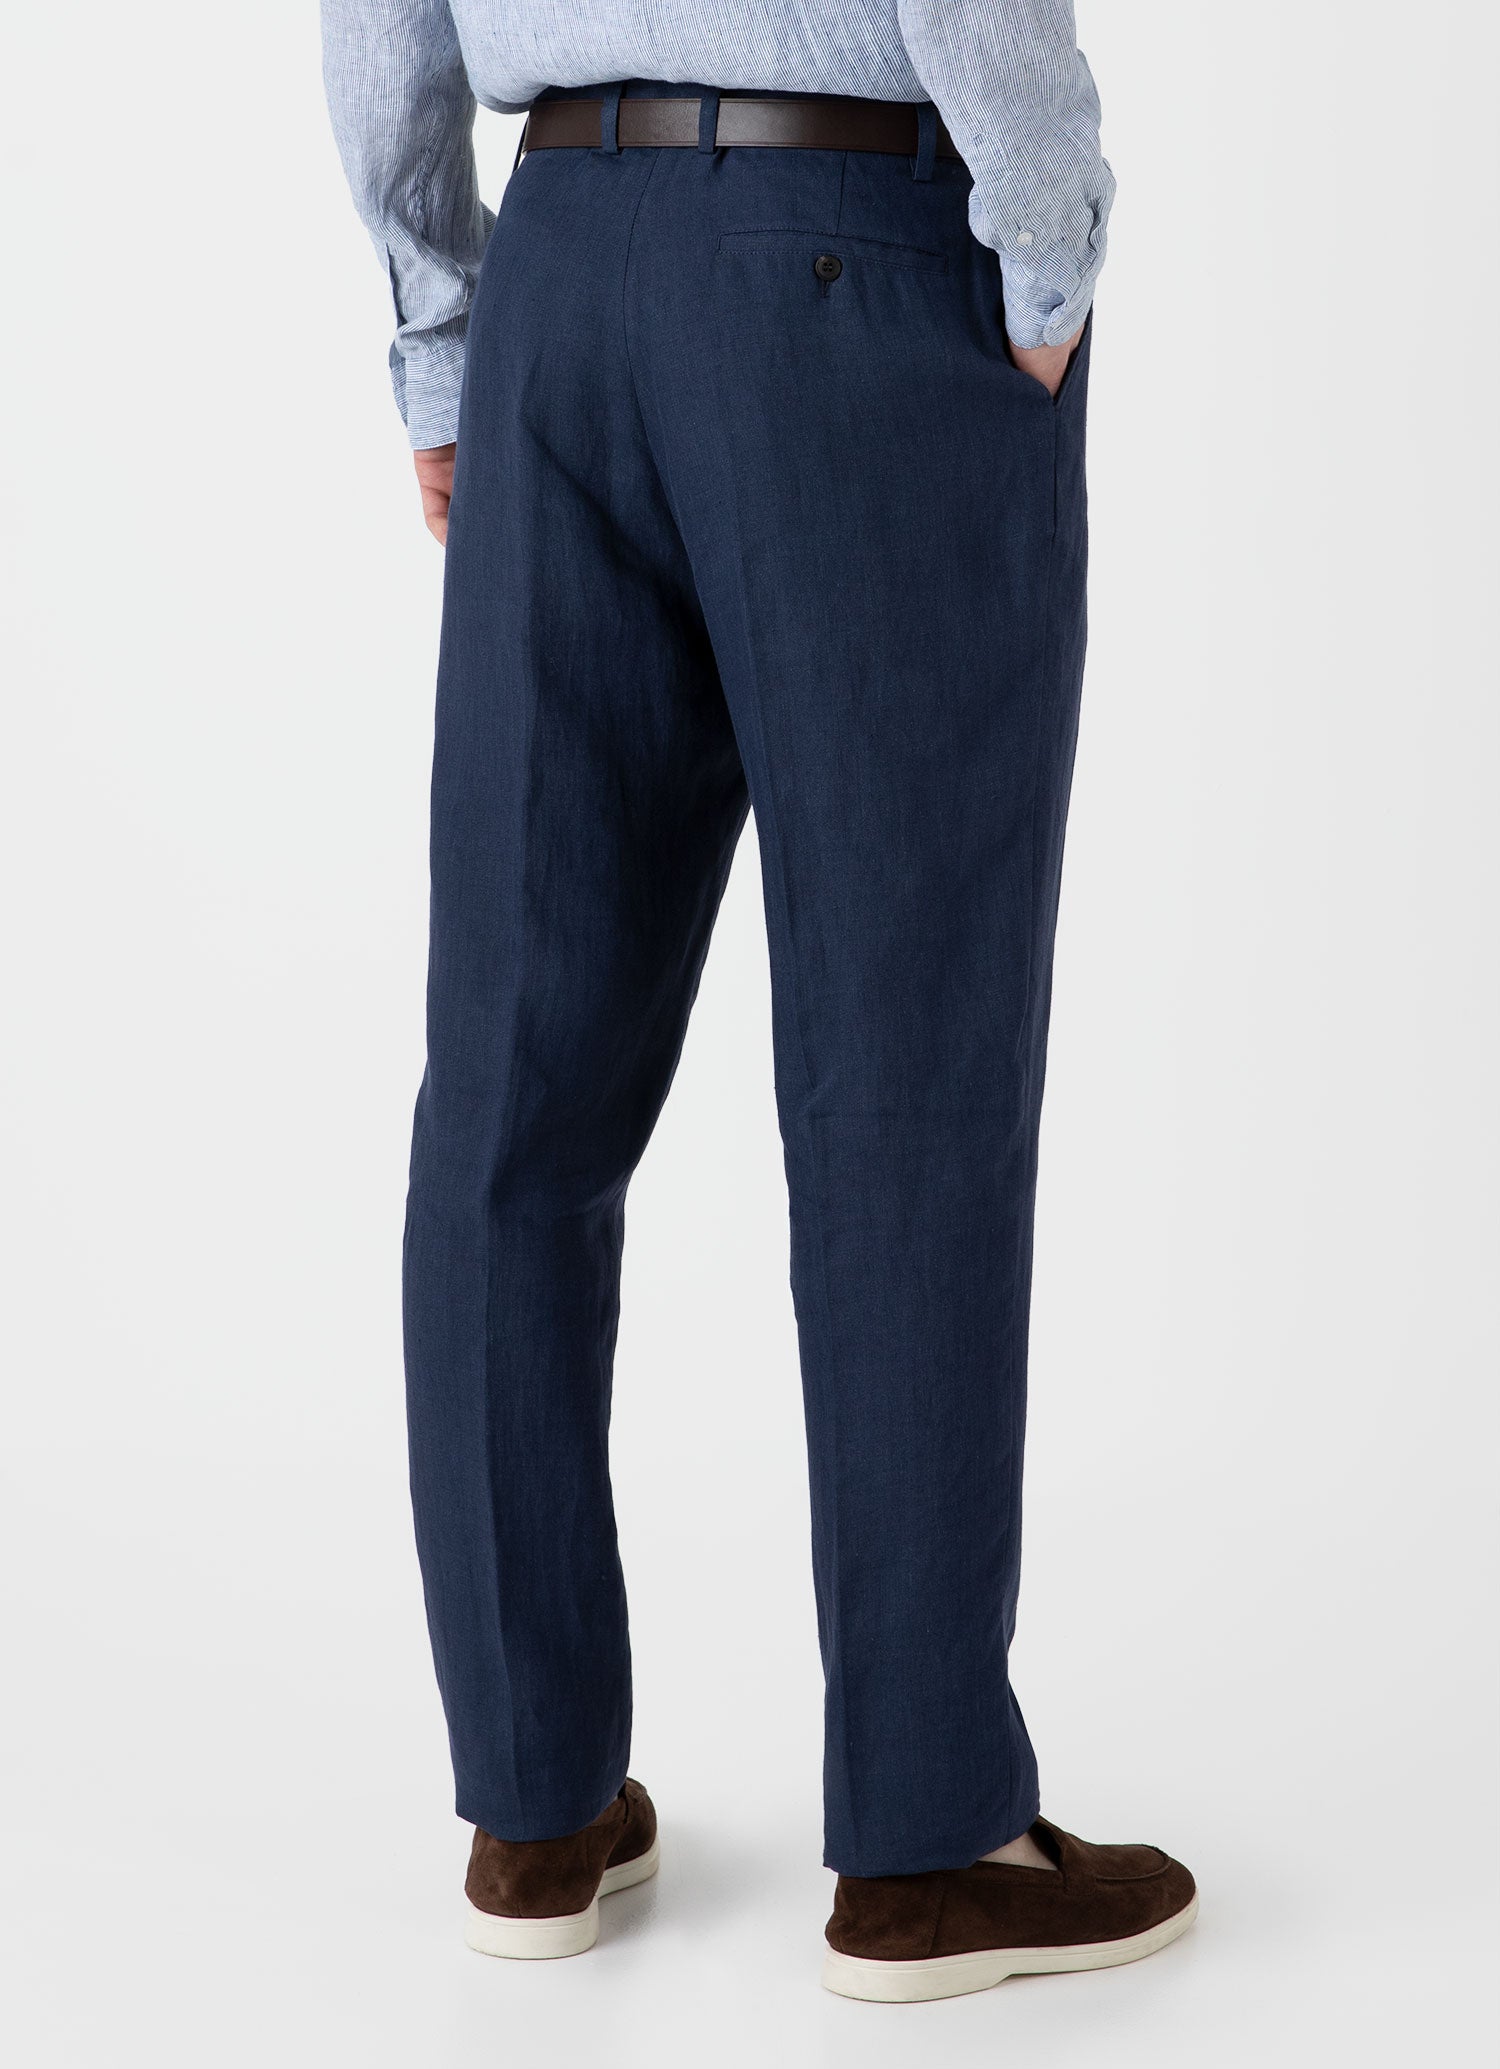 Slim Fit Navy Tuxedo Trousers | Buy Online at Moss